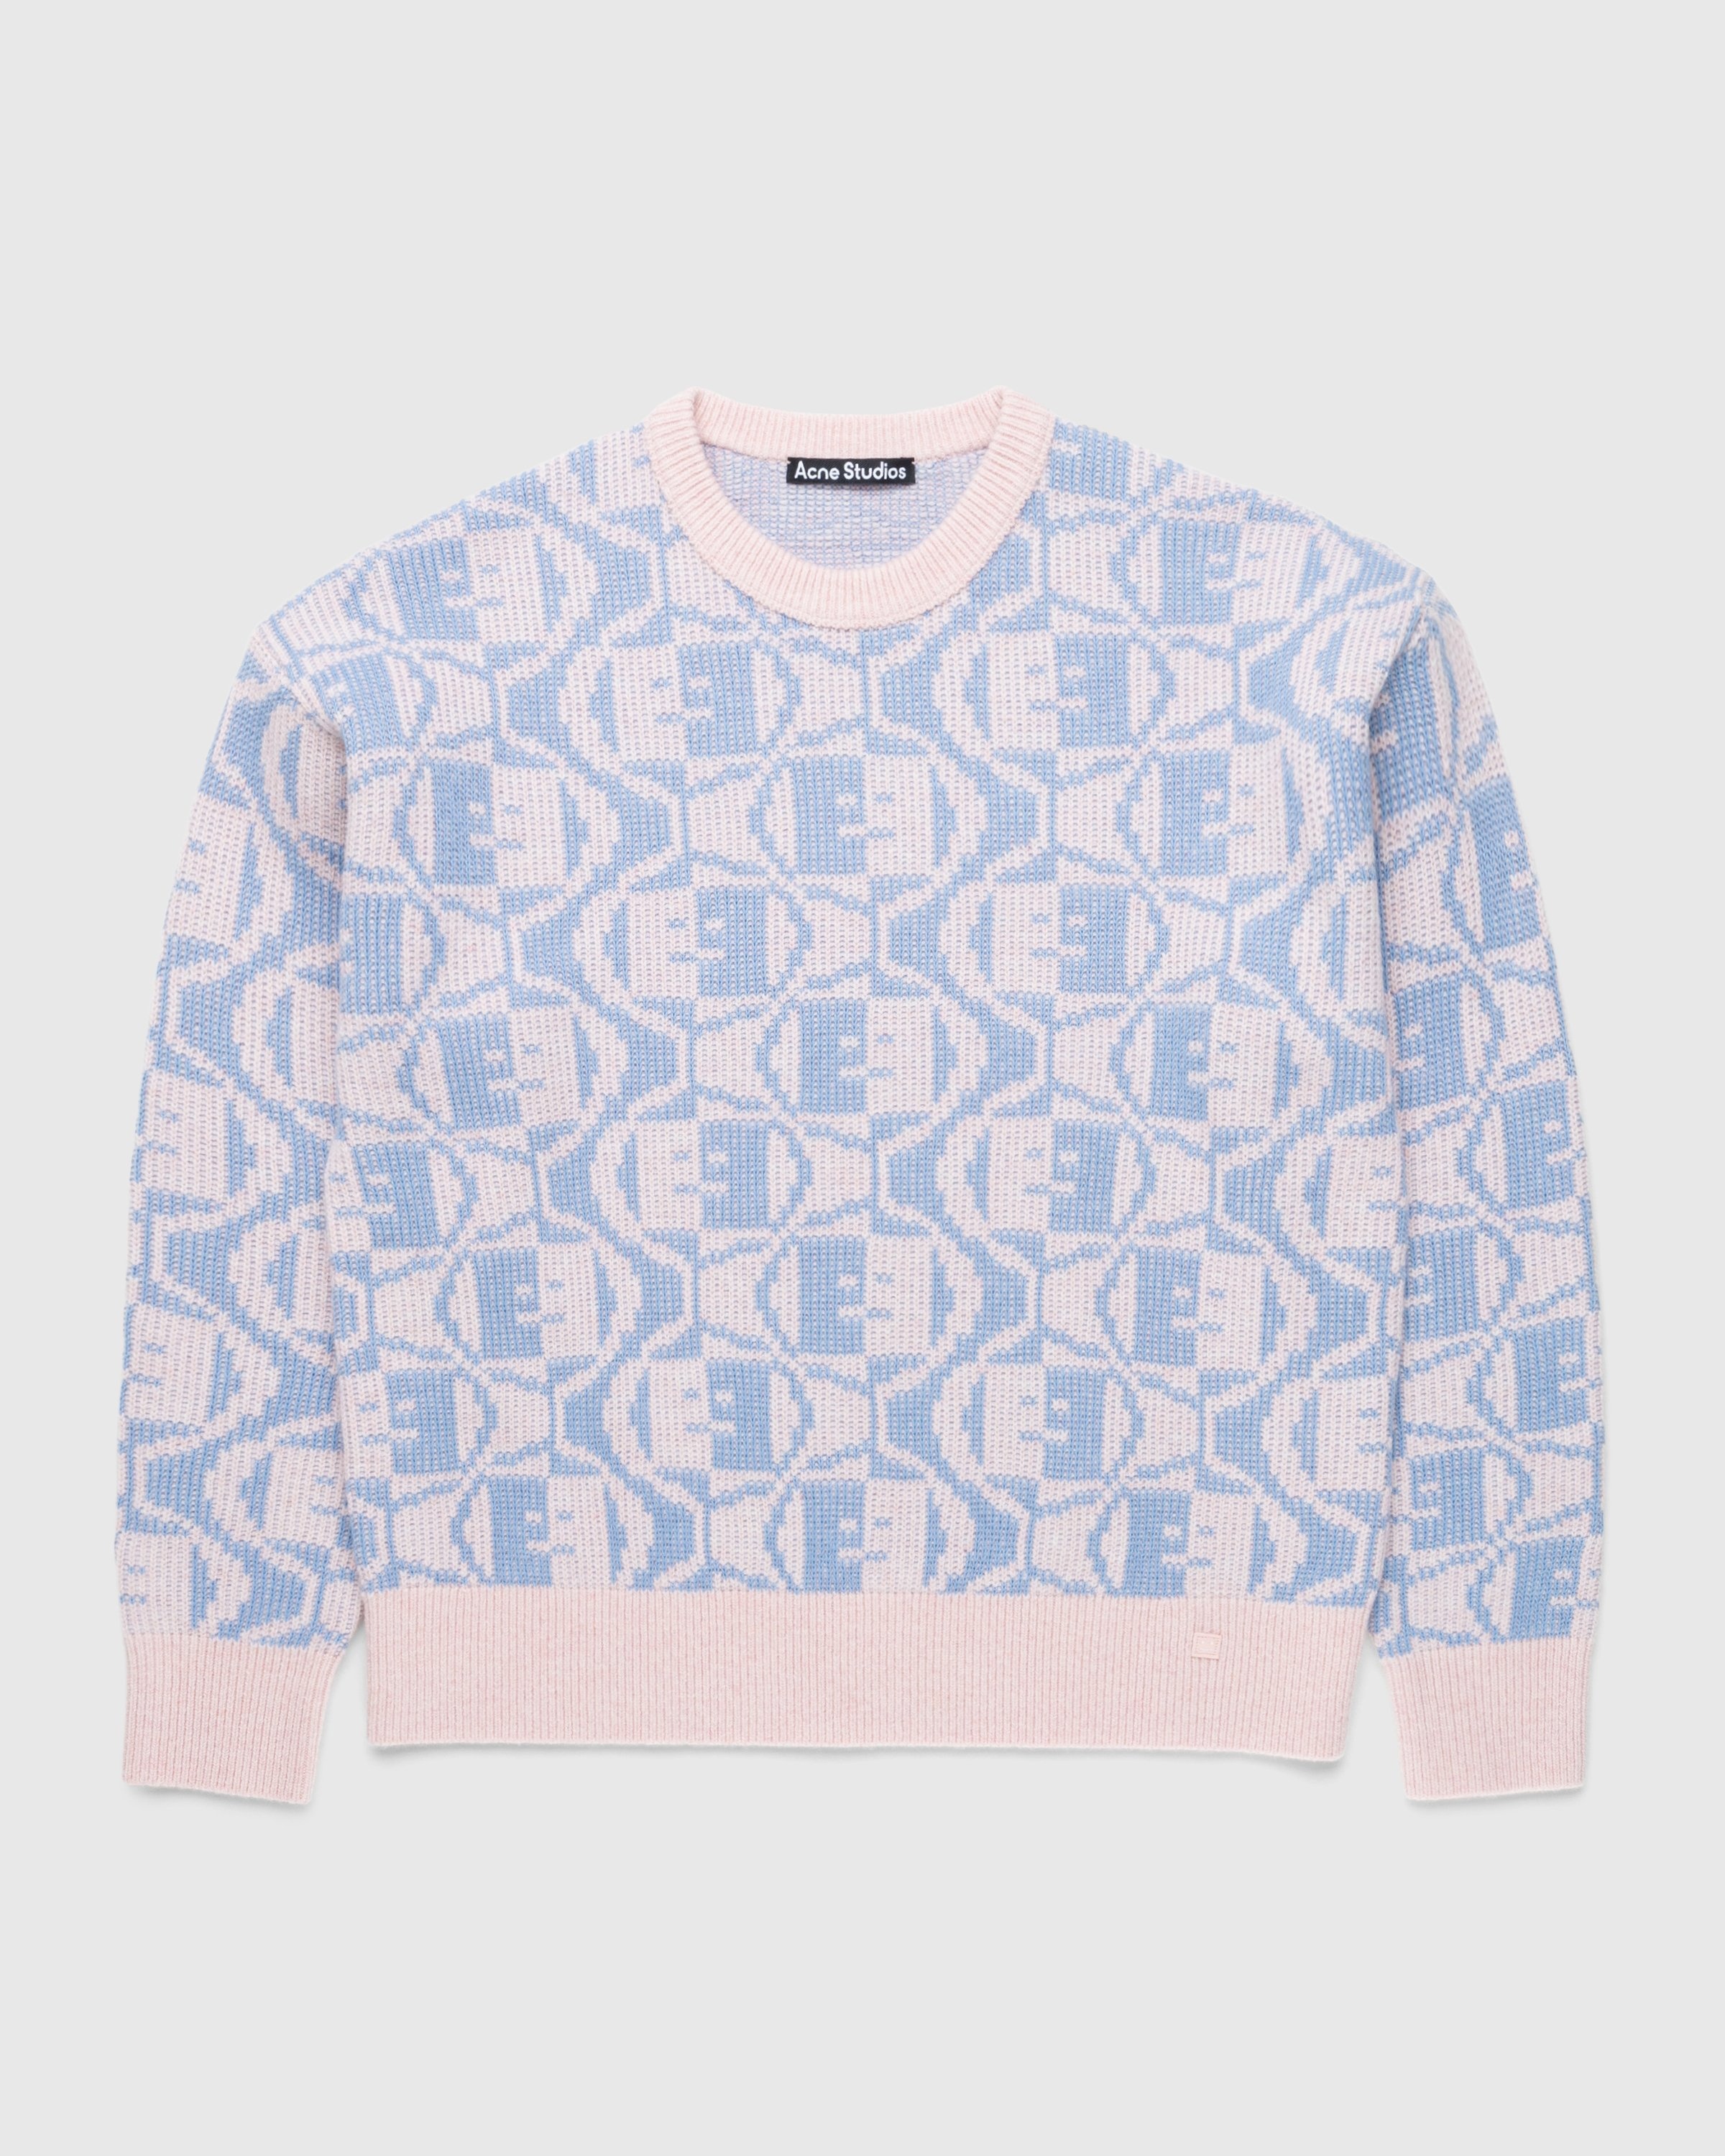 Acne Studios Brushed Jacquard Mohair-Blend Jumper  Acne studios sweater,  Jacquard sweater, Wool blend sweater